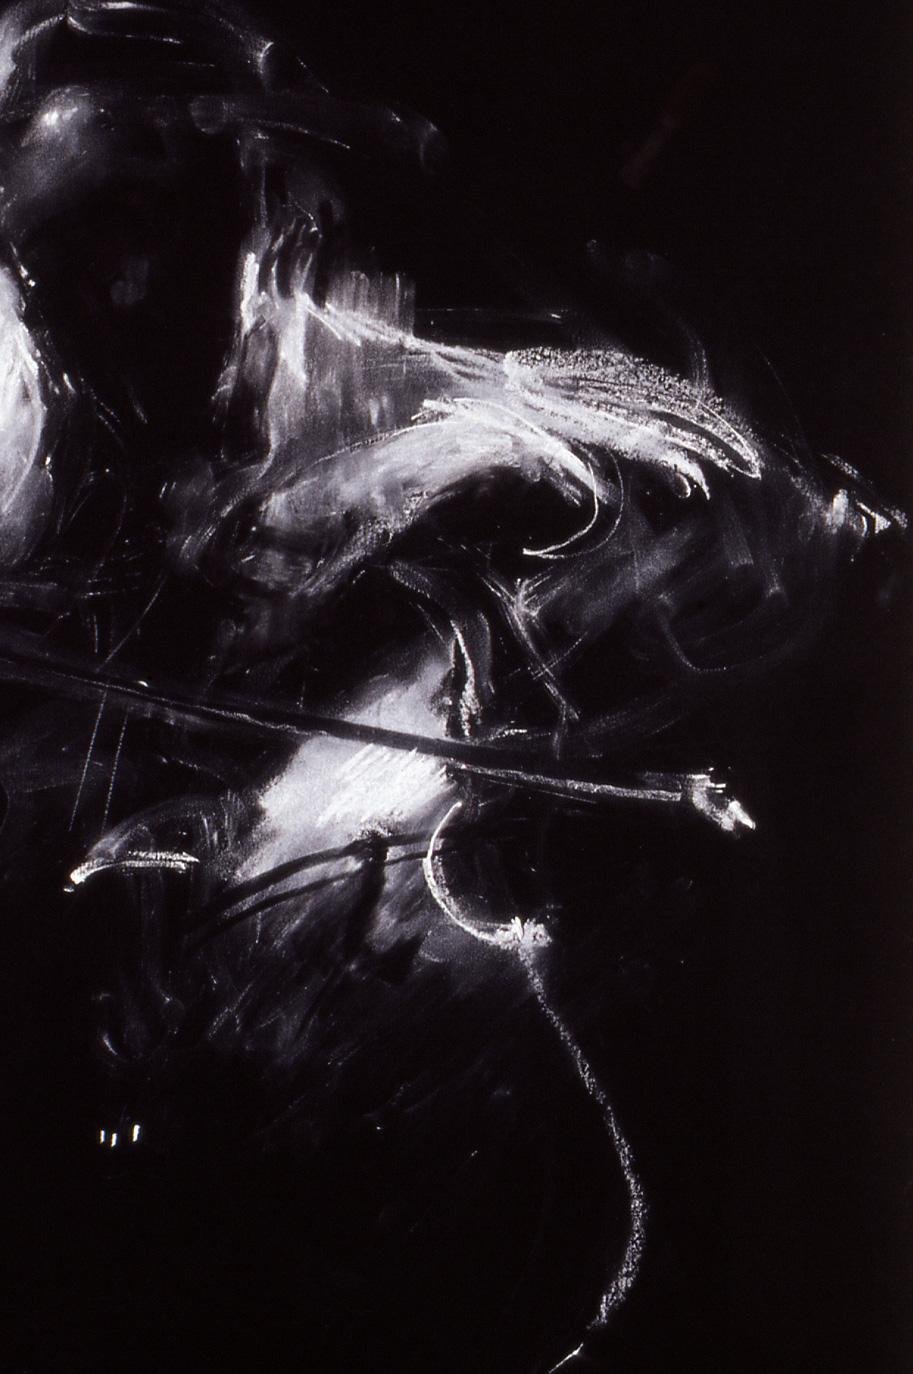 An original pastel-on-paper drawing by British artist Charlie Mackesy - depicting the motion of a musician playing the Cello. Mackesy instantly draws you into the artwork with his clever use of white pastel on black. The black paper creates the